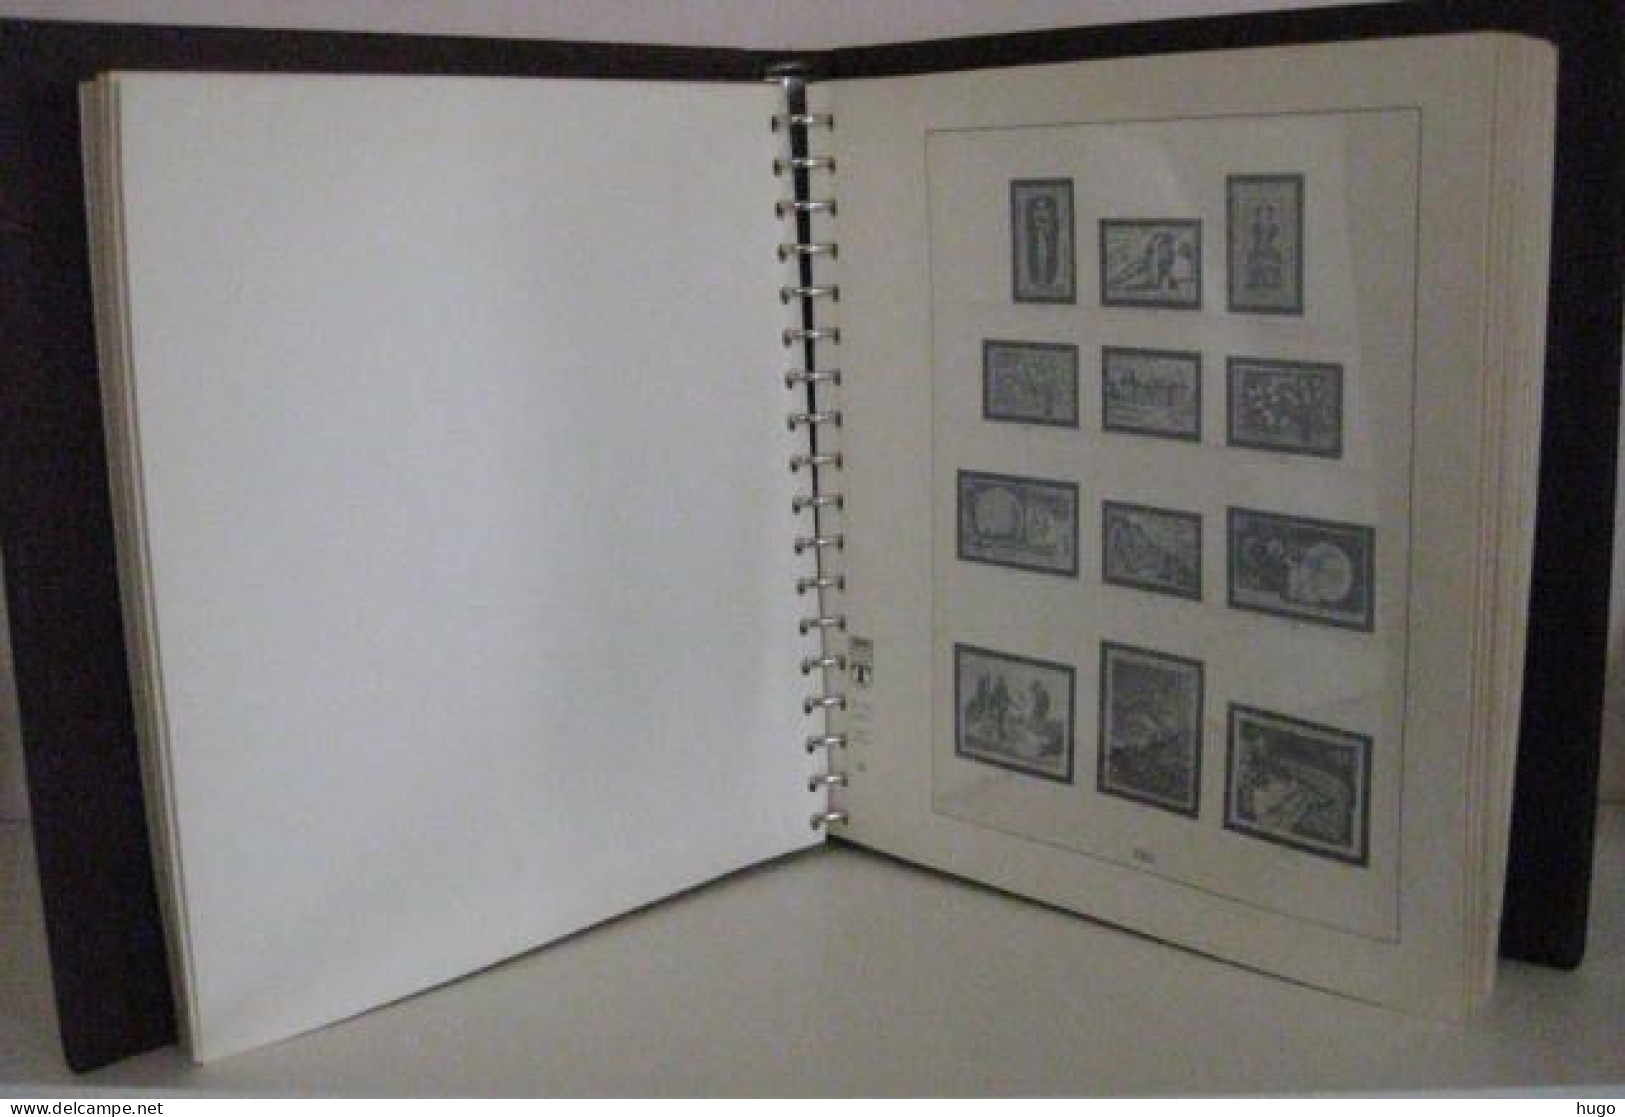 LINDNER FRANCE - ILLUSTRATED ALBUM PAGES YEAR 1960-1971, INCL. RING BINDER - Binders With Pages